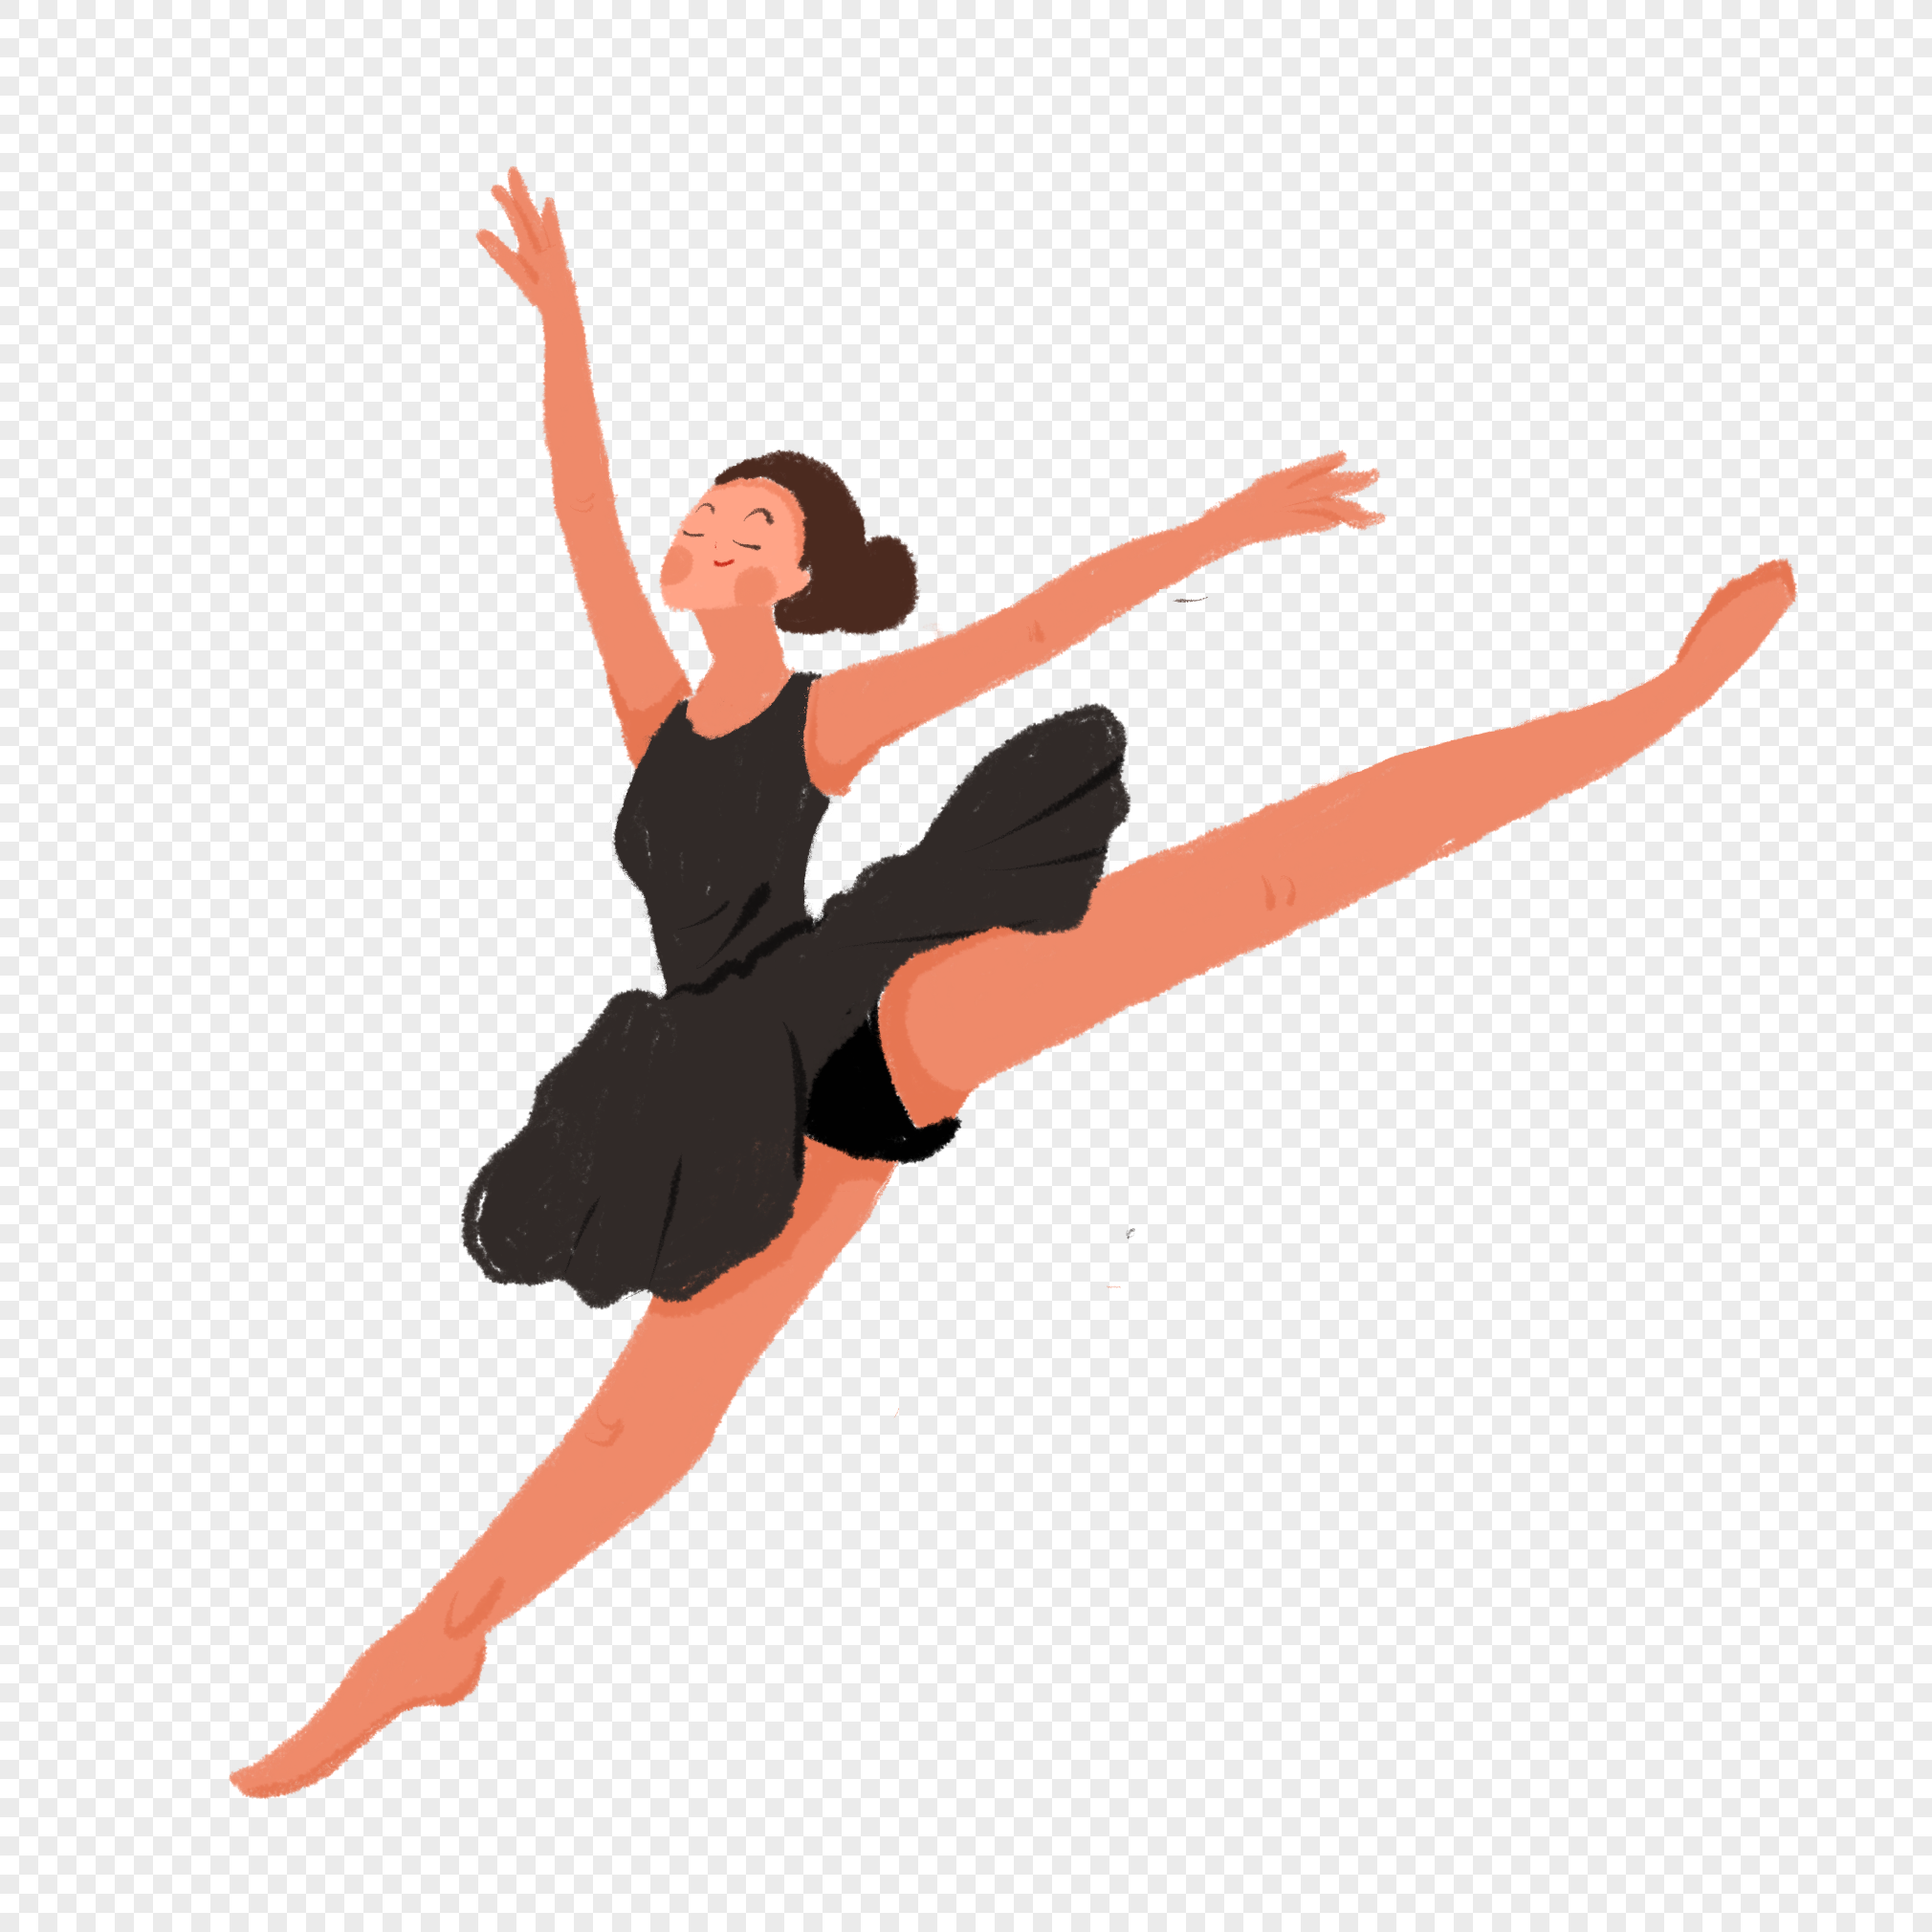 Ballerina Pose Silhouette PNG Free, Silhouette Ballerina Woman Dancing Poses  Pack, Silhouette, Black, Woman PNG Image For Free Download